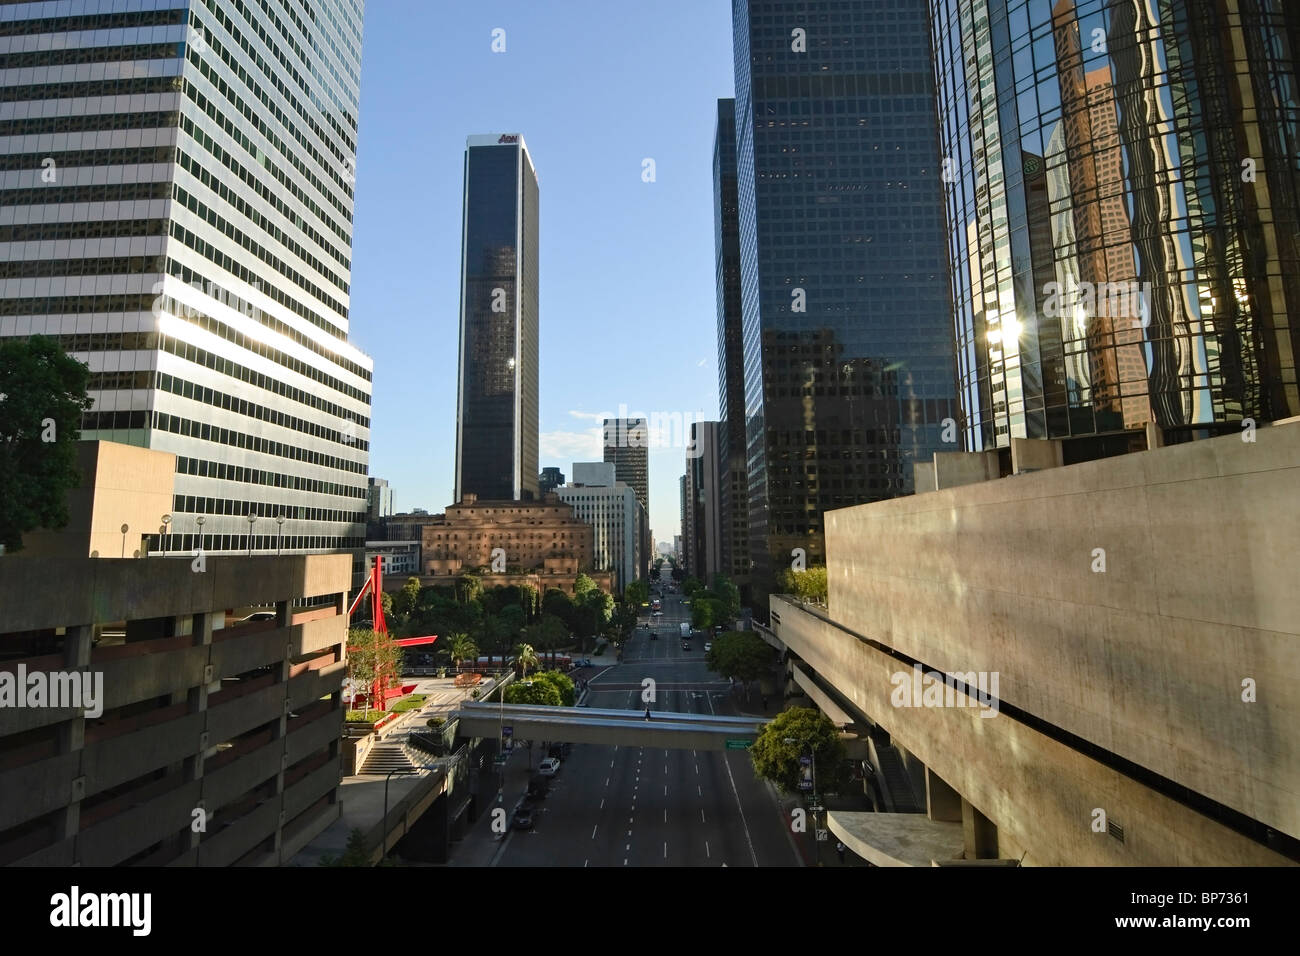 The Bonaventure Hotel reflecting the downtown Los Angeles skyscrapers. Stock Photo